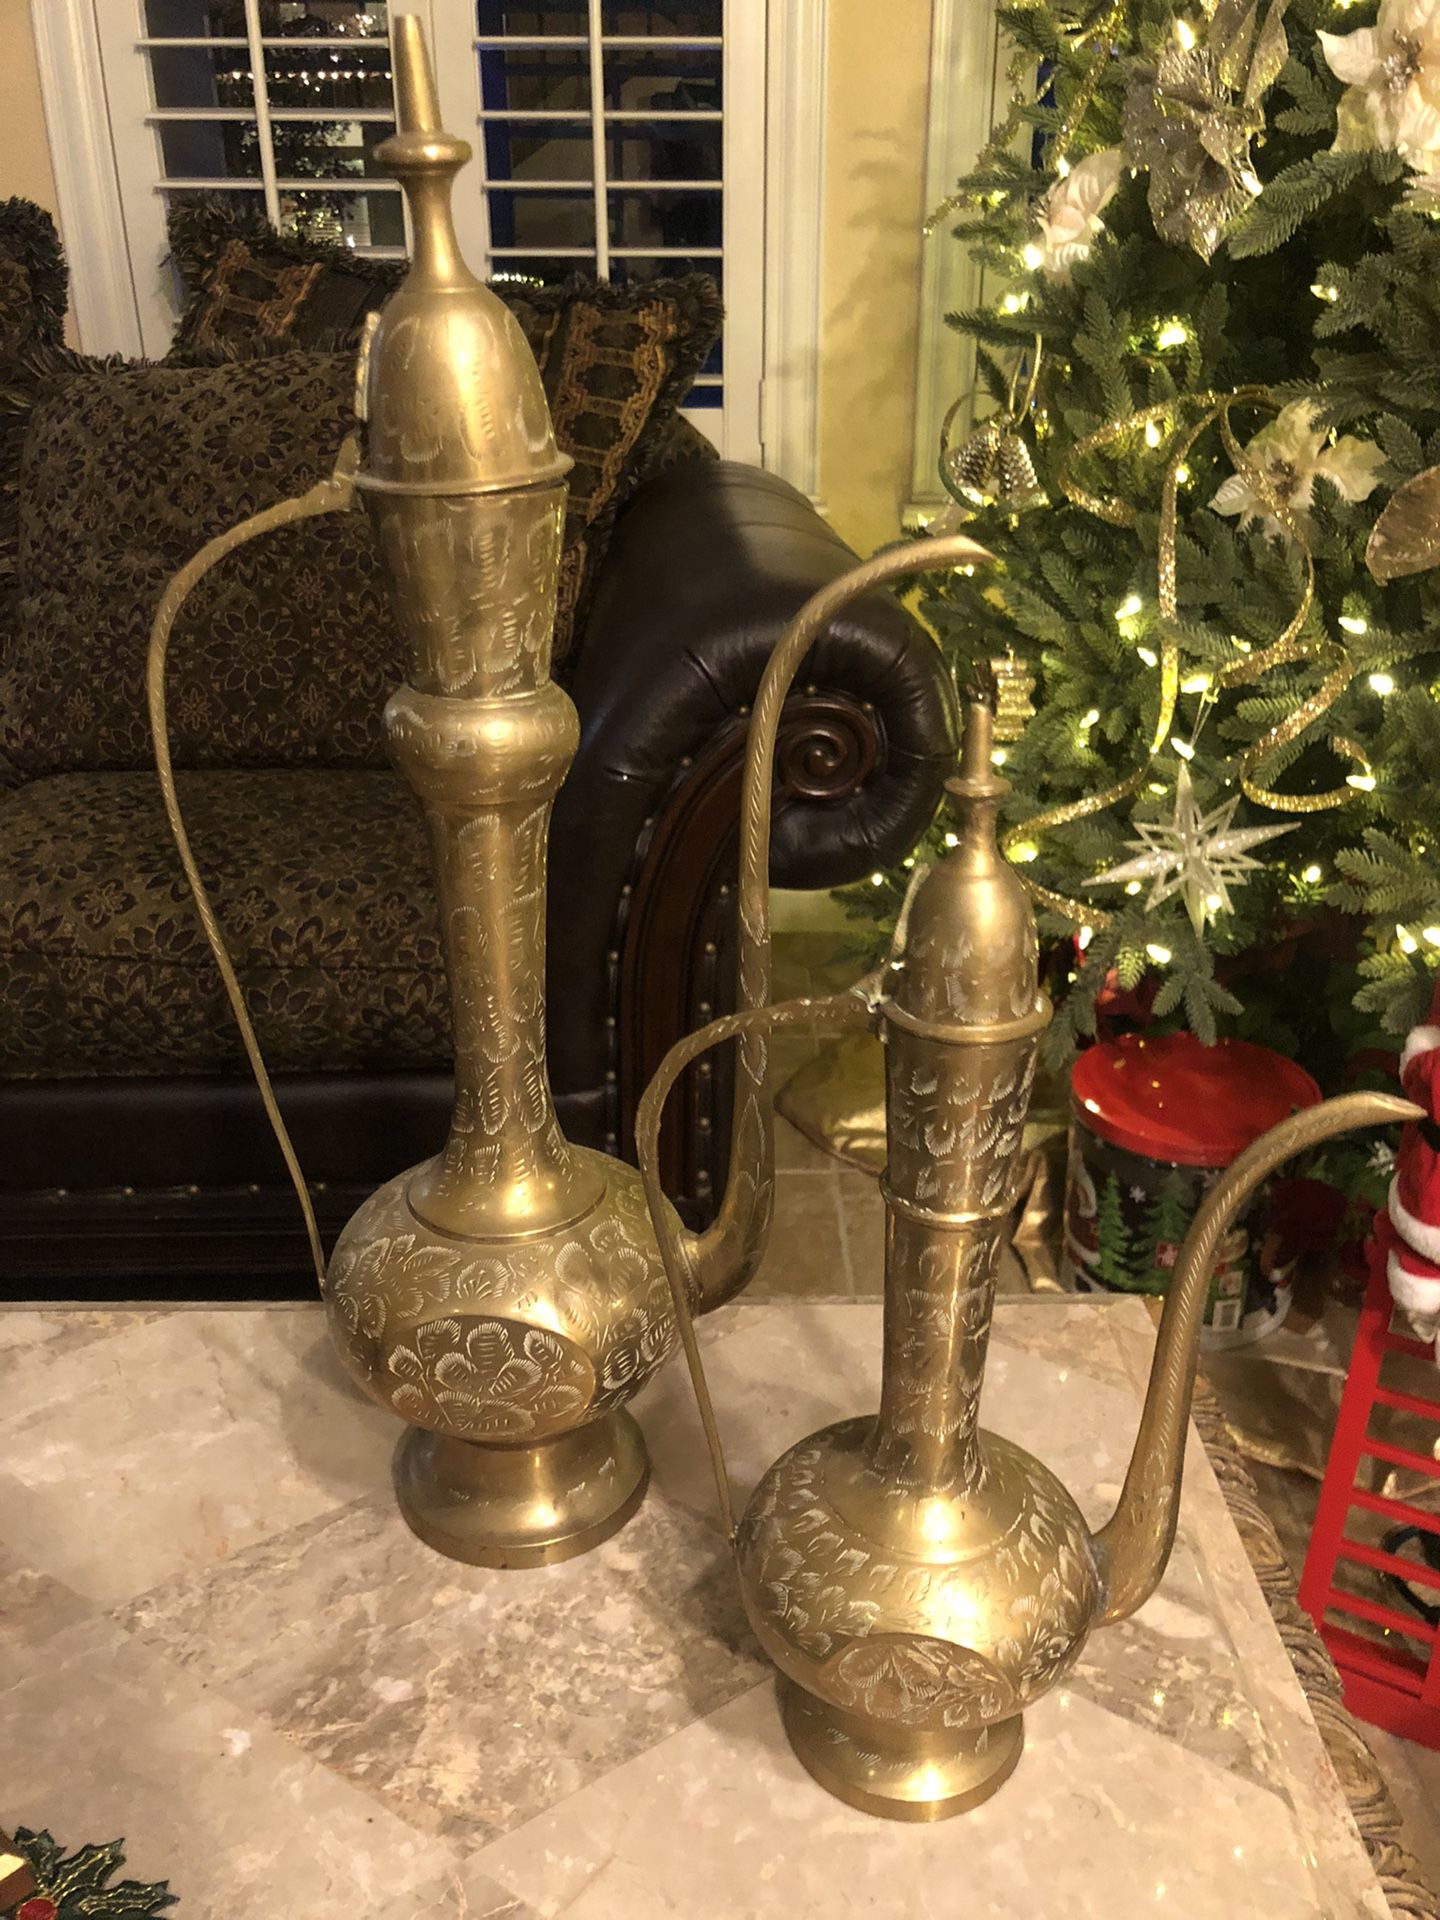 18” & 8” Tall Brass Decanters